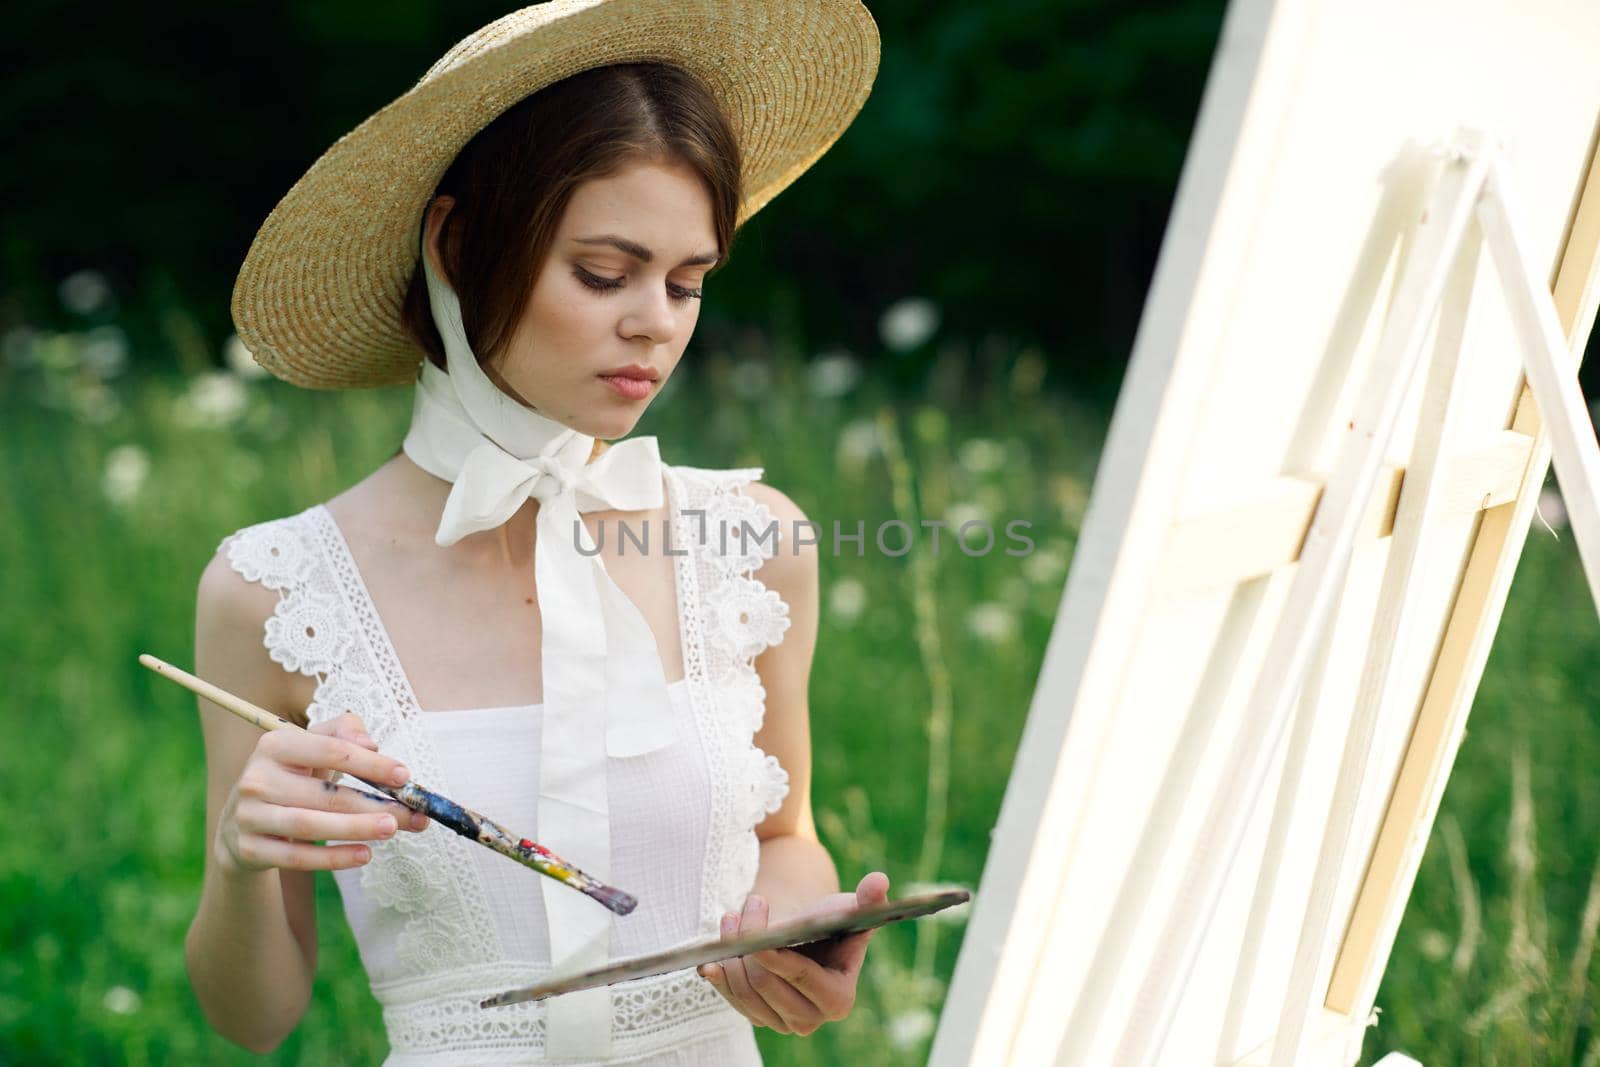 woman artist view with paint palette draws a picture in nature. High quality photo